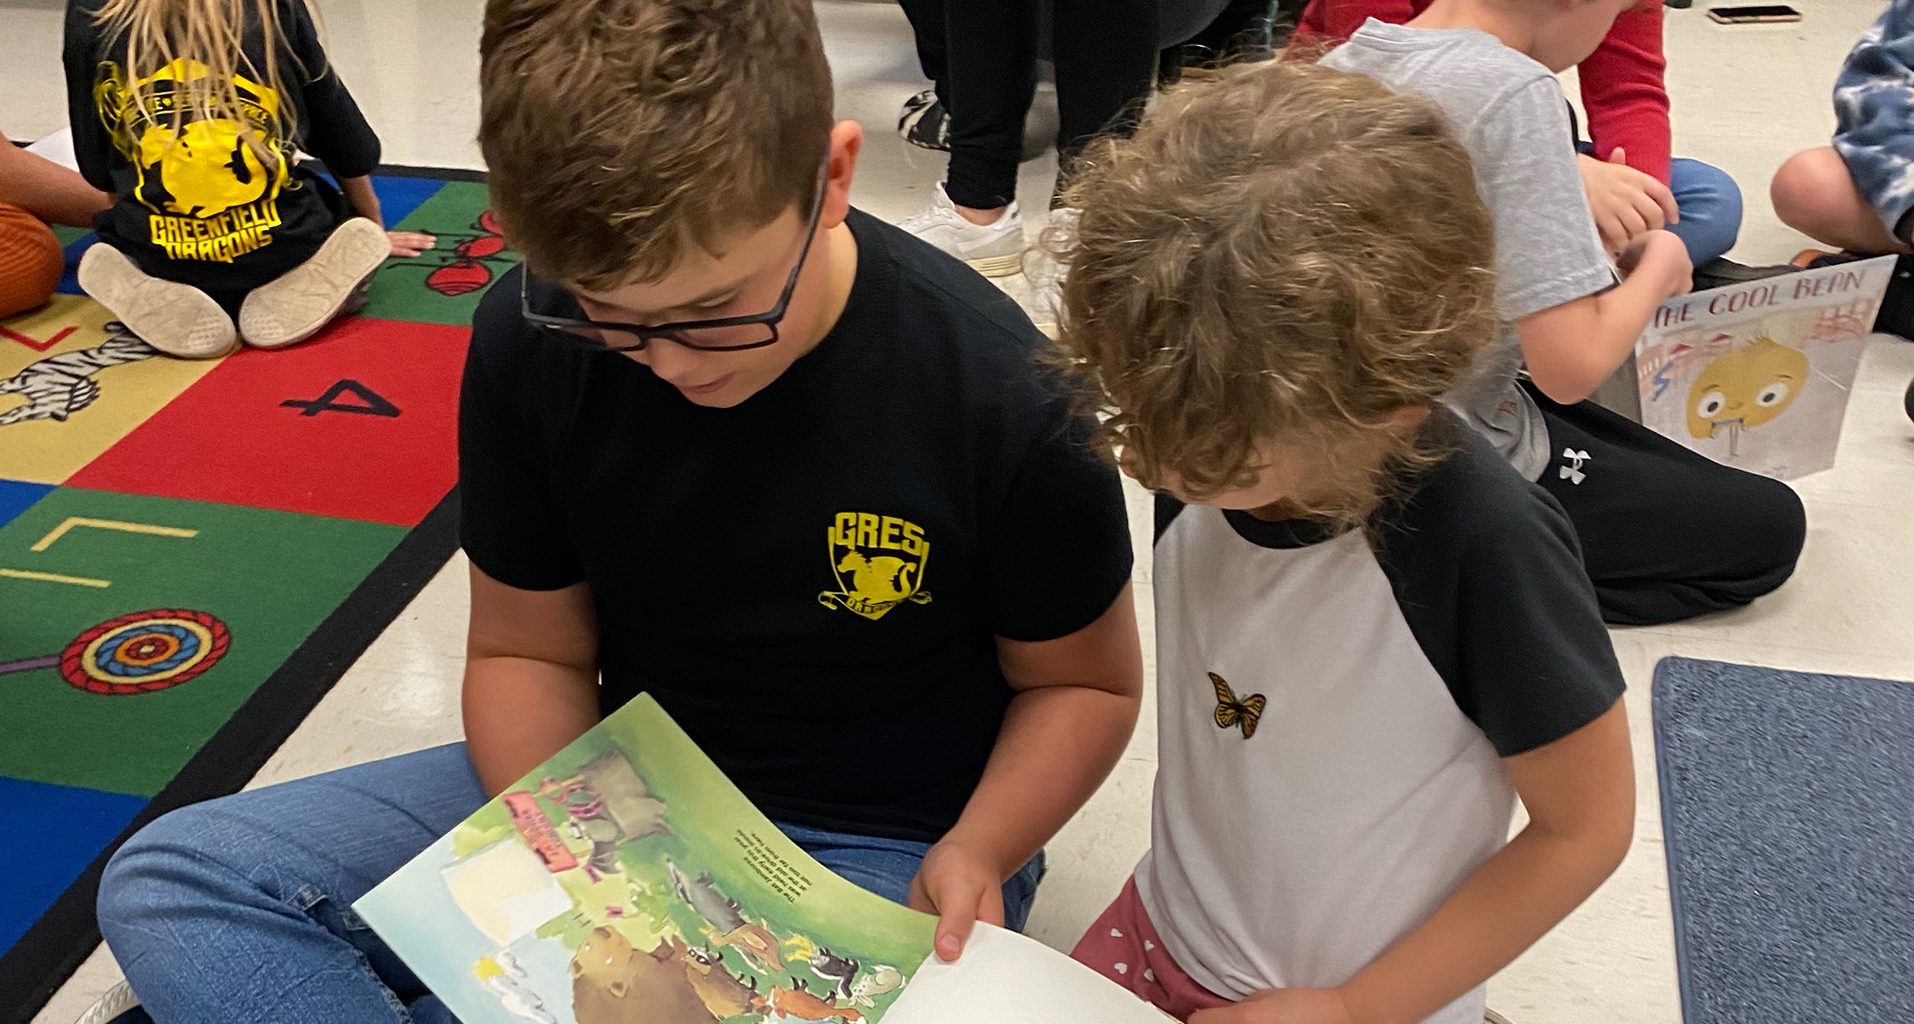 students looking at a book together